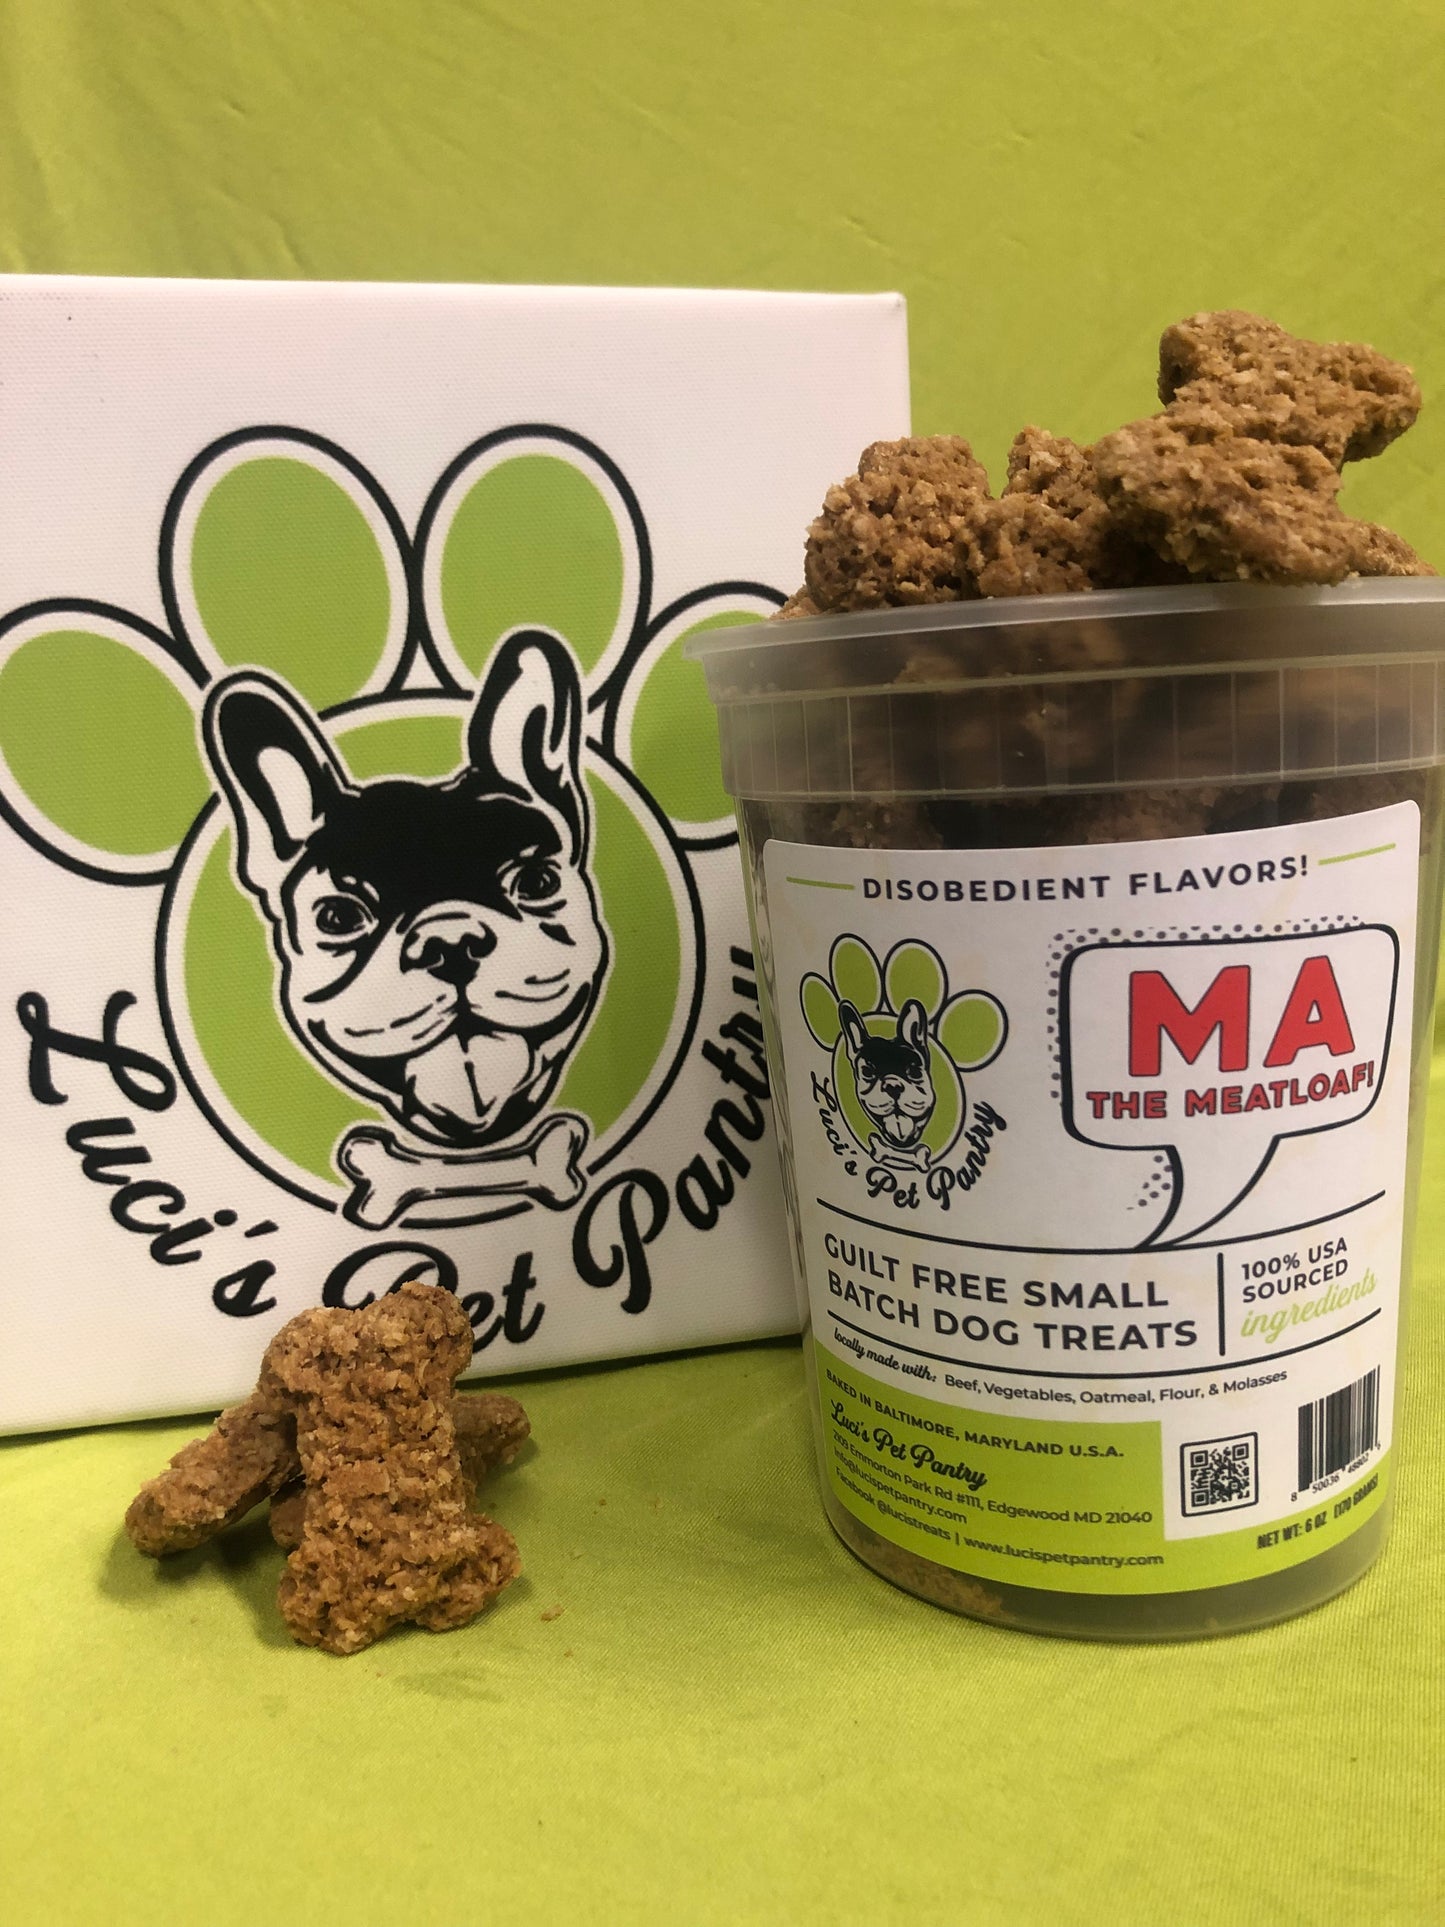 Ma The Meatloaf - All Natural "Beef & Vegetables" Dog & Puppy Treats - Disobedient Tub of Biscuits